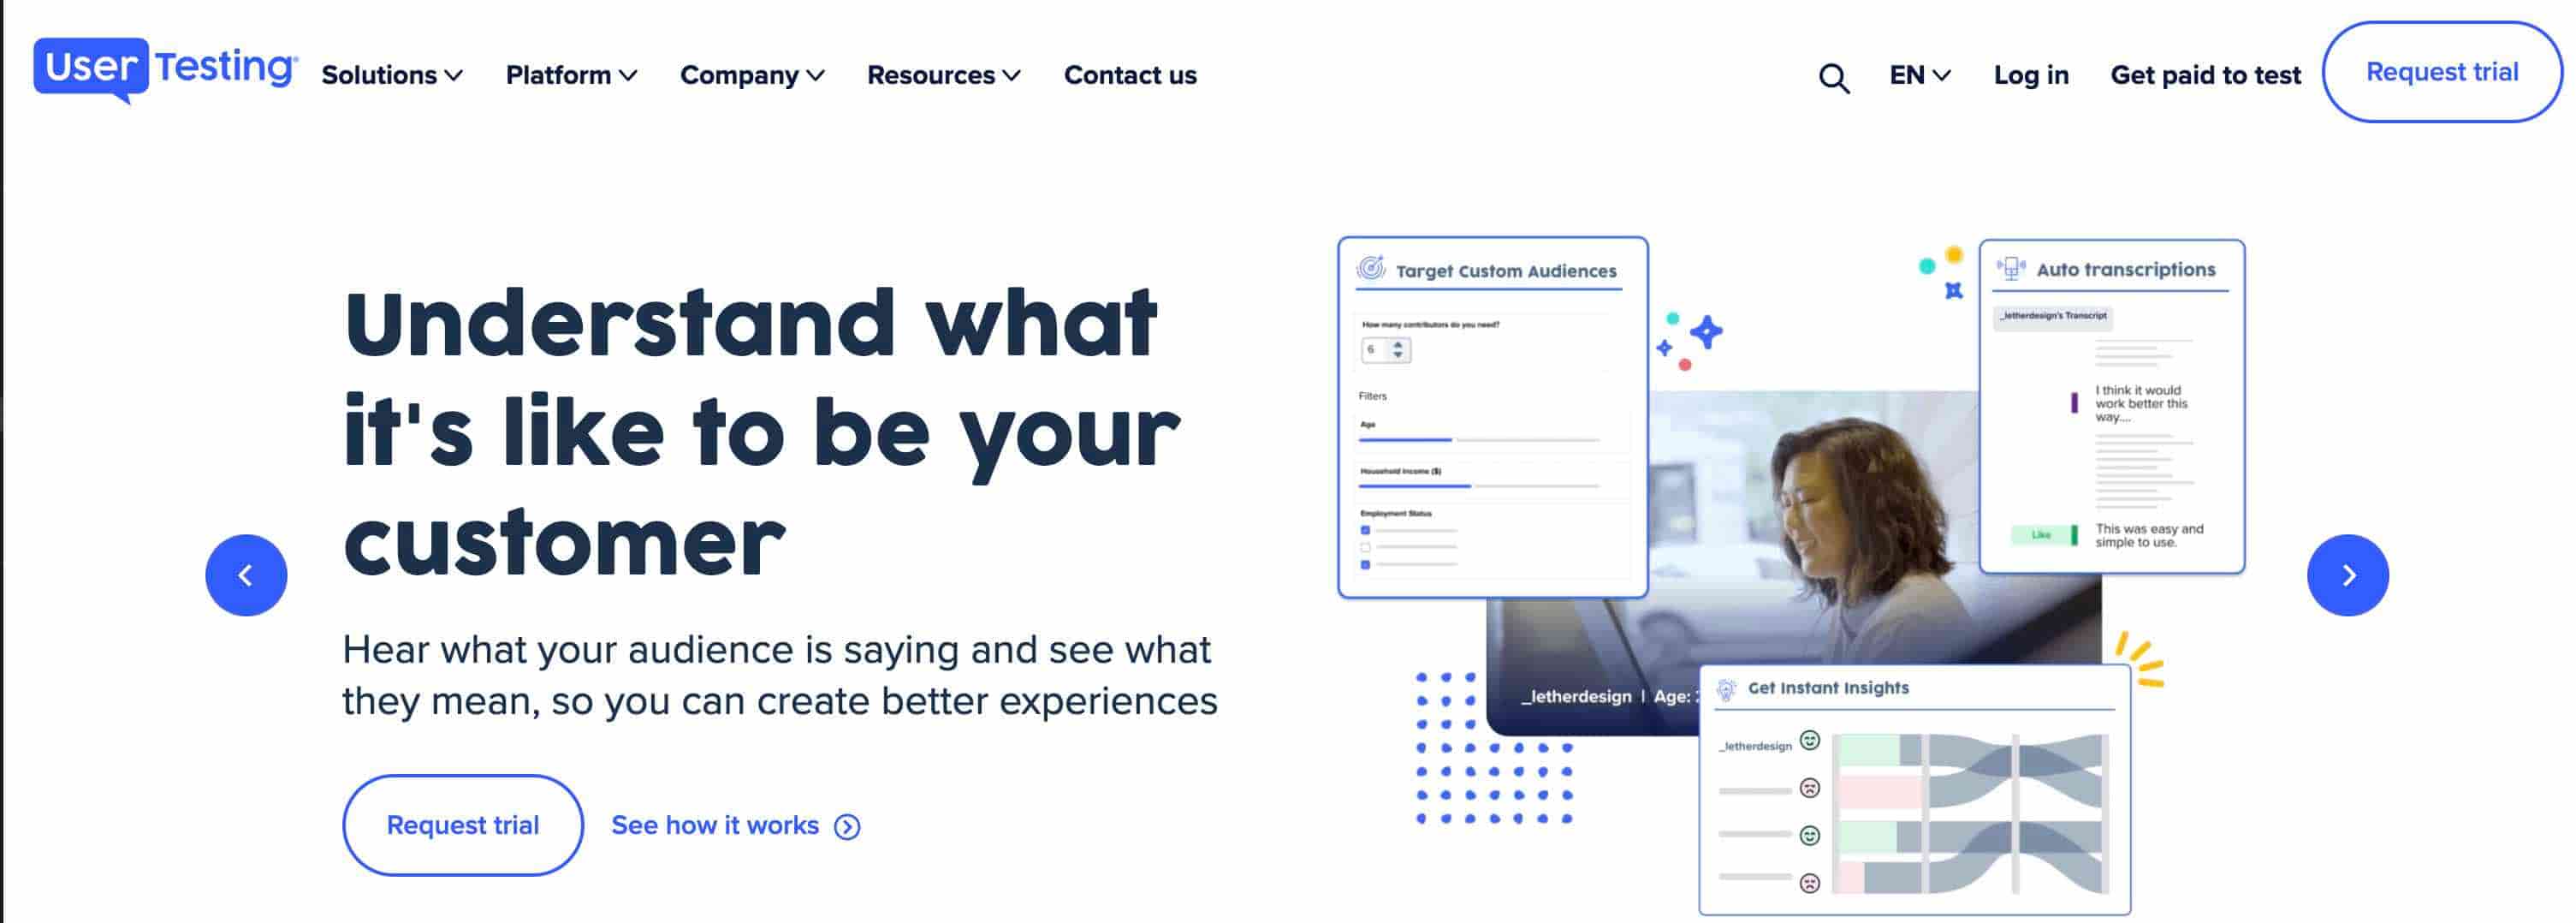 UserTesting.com is a tracking tool platform that can collect user feedback on any digital product